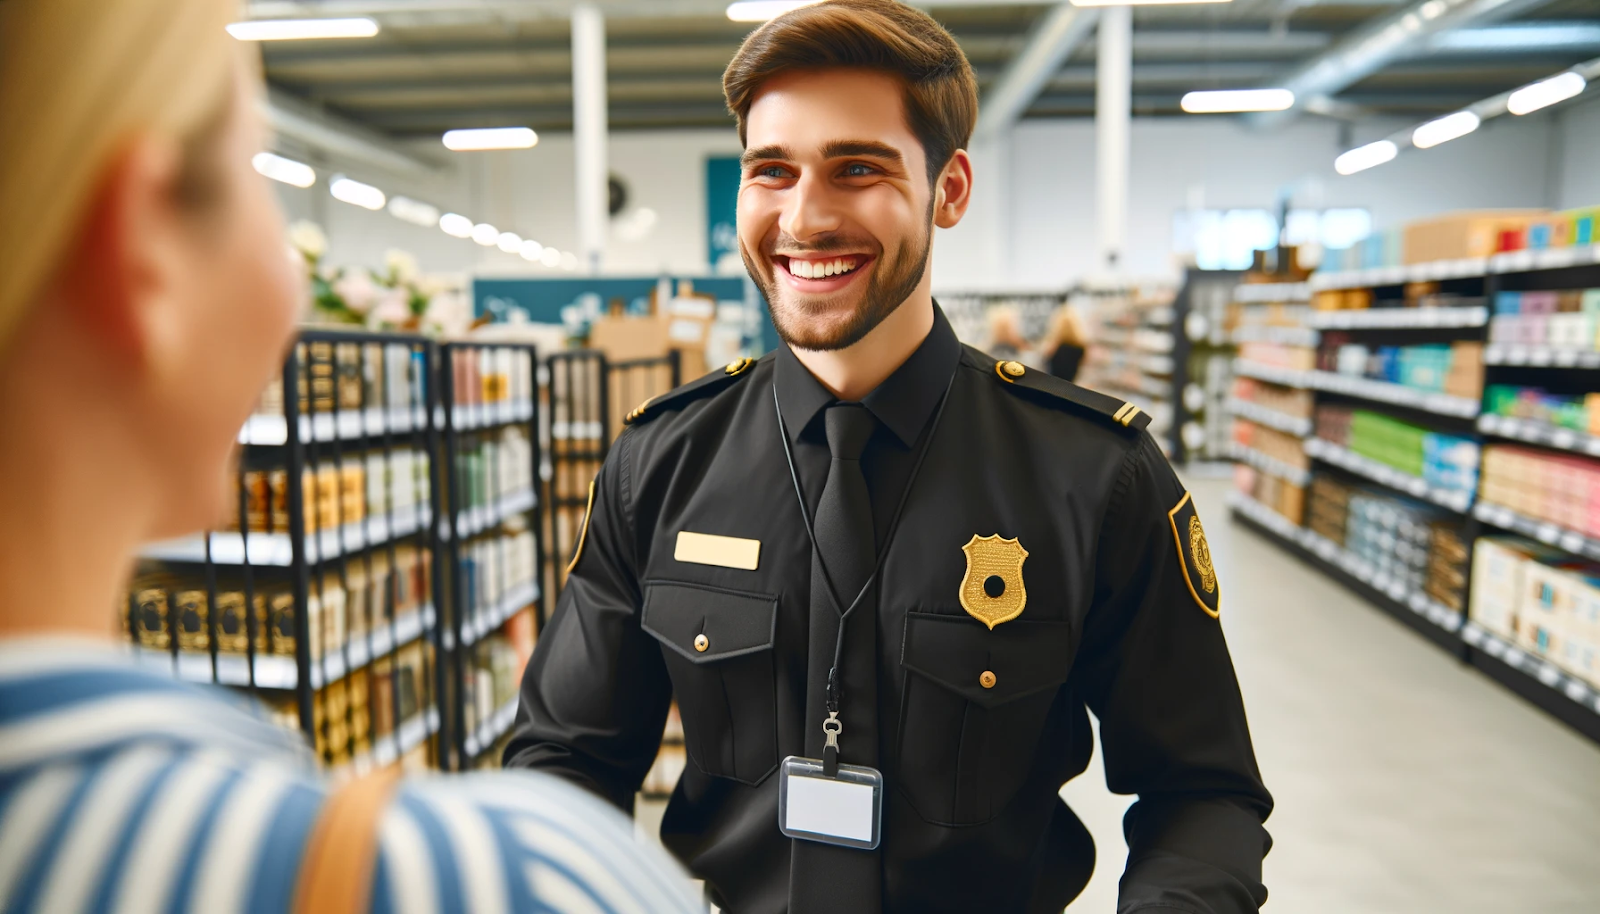 Cheerful security guard in a retail store, highlighting effective retail security procedures in action.